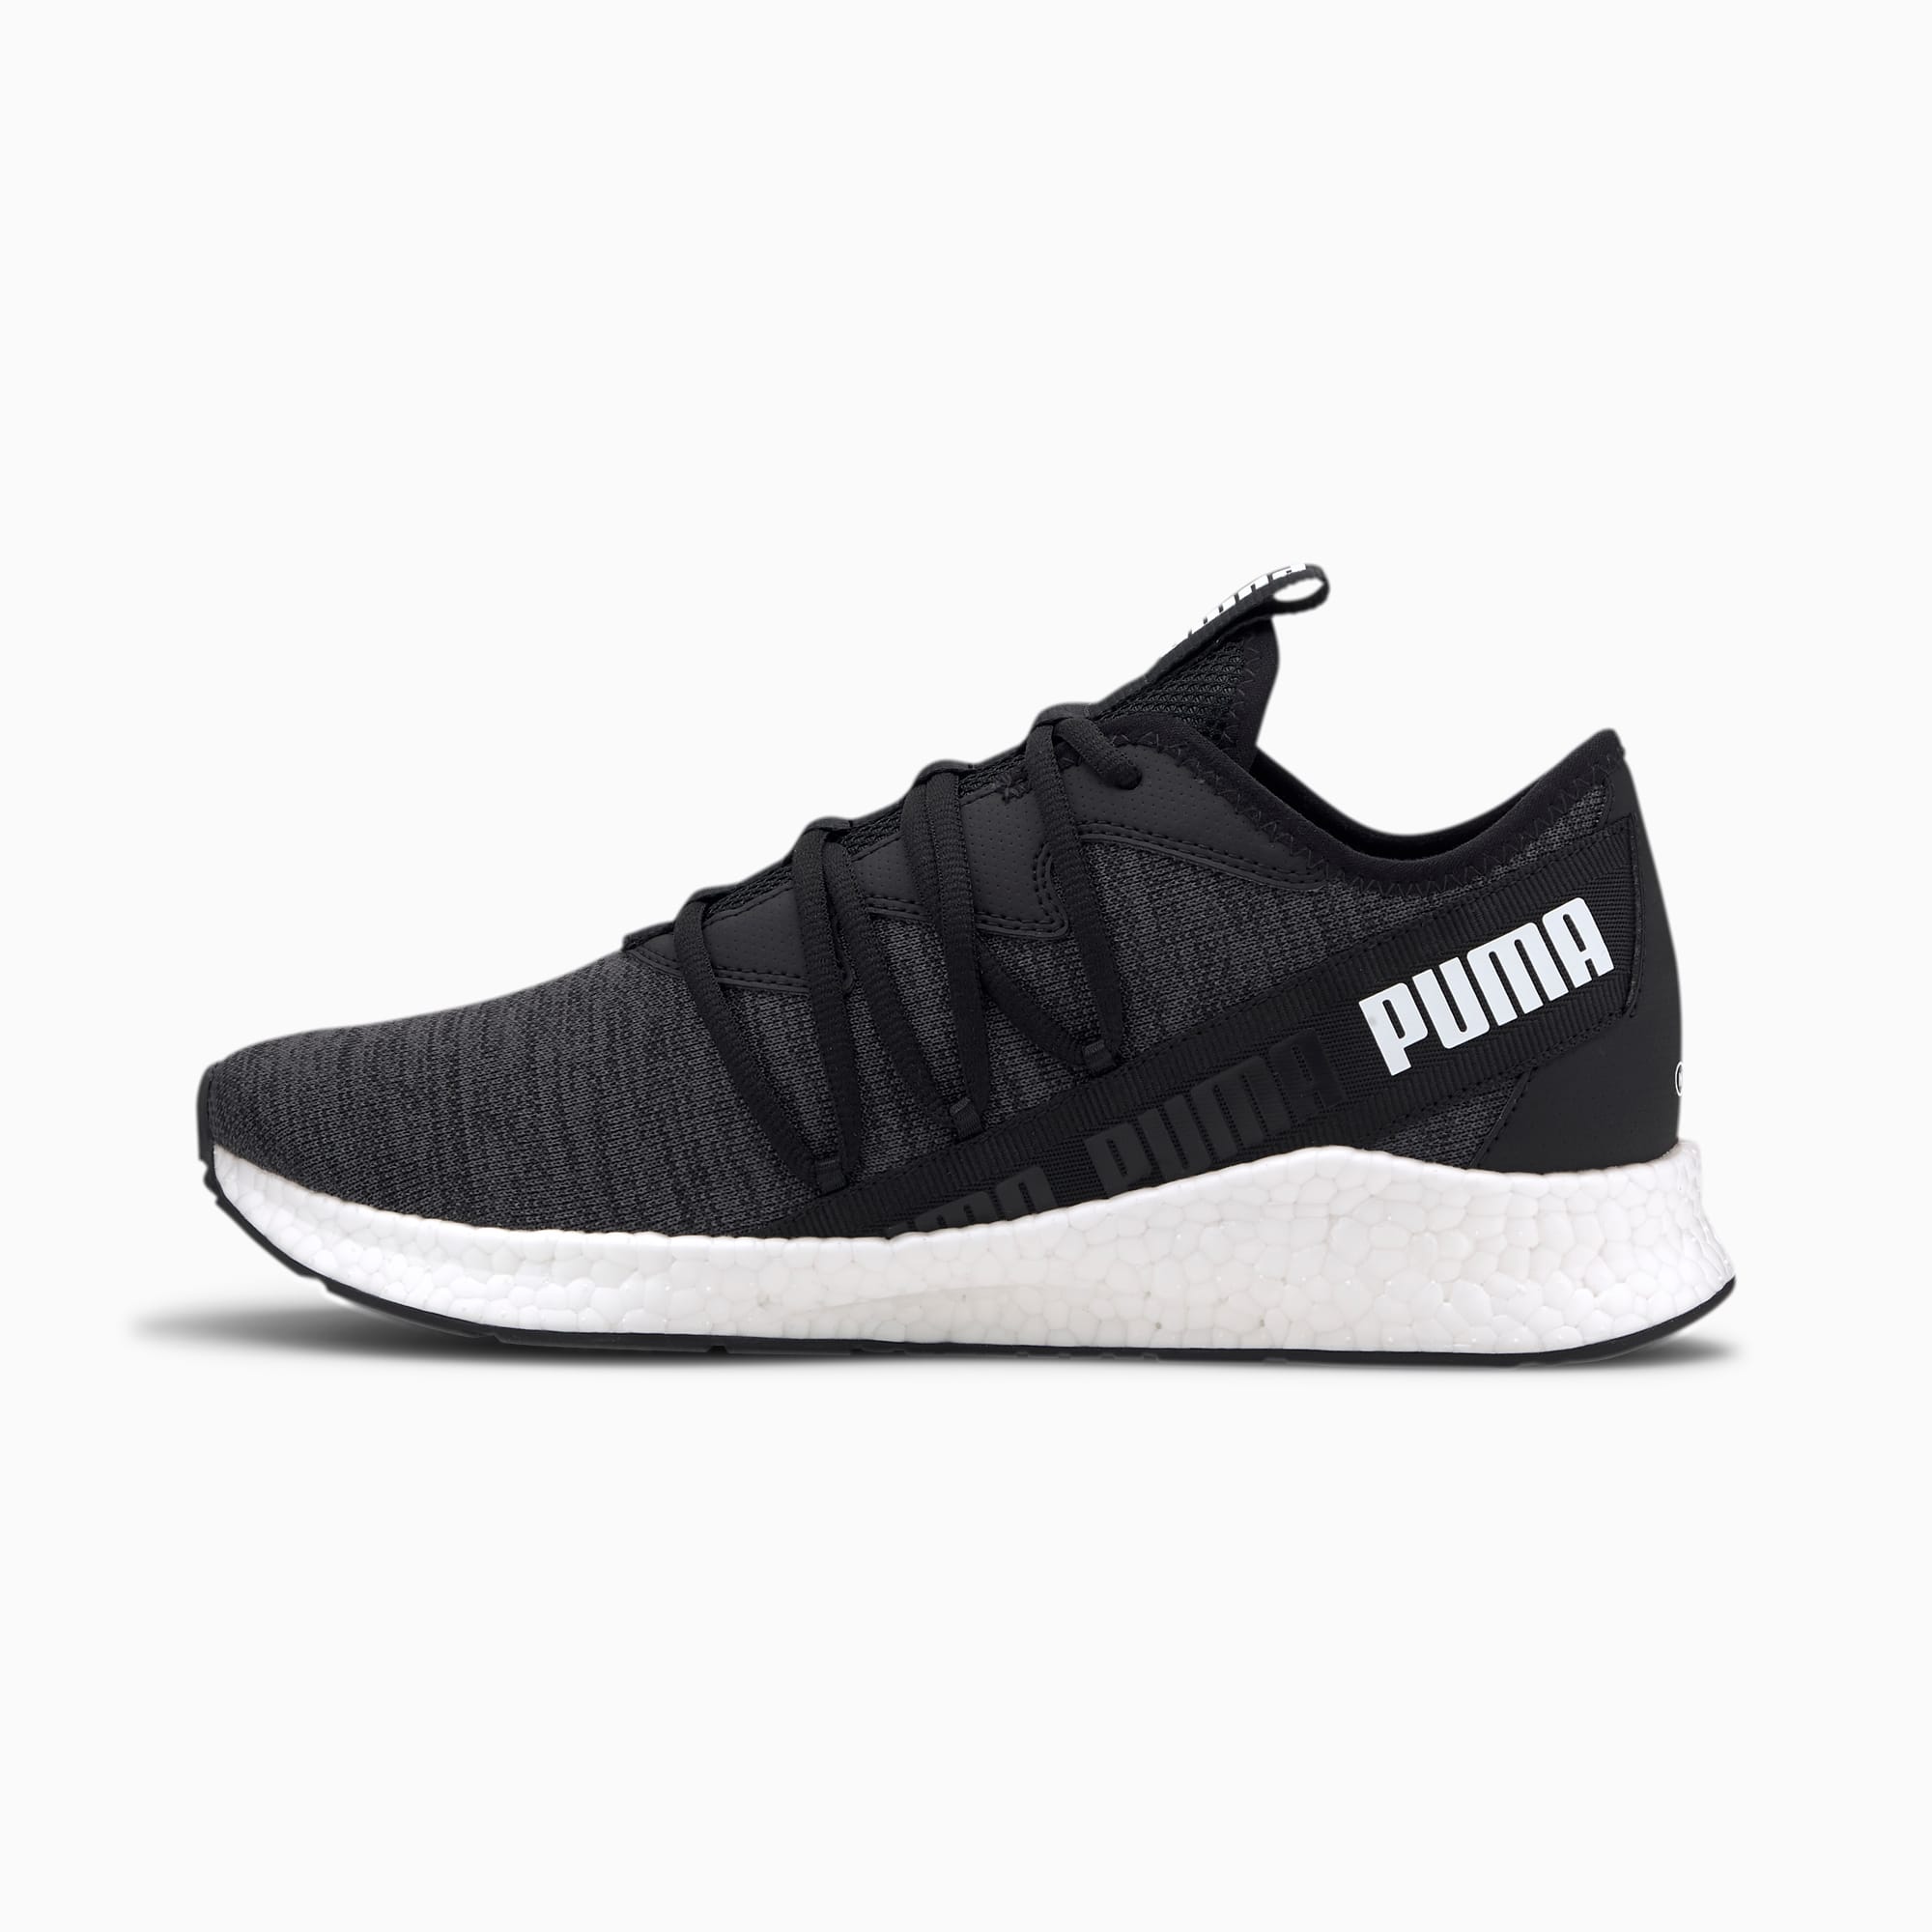 Harden Counting insects Inconvenience Star MultiKNIT NRGY Running Shoes | Puma Black-Puma White | PUMA Running |  PUMA